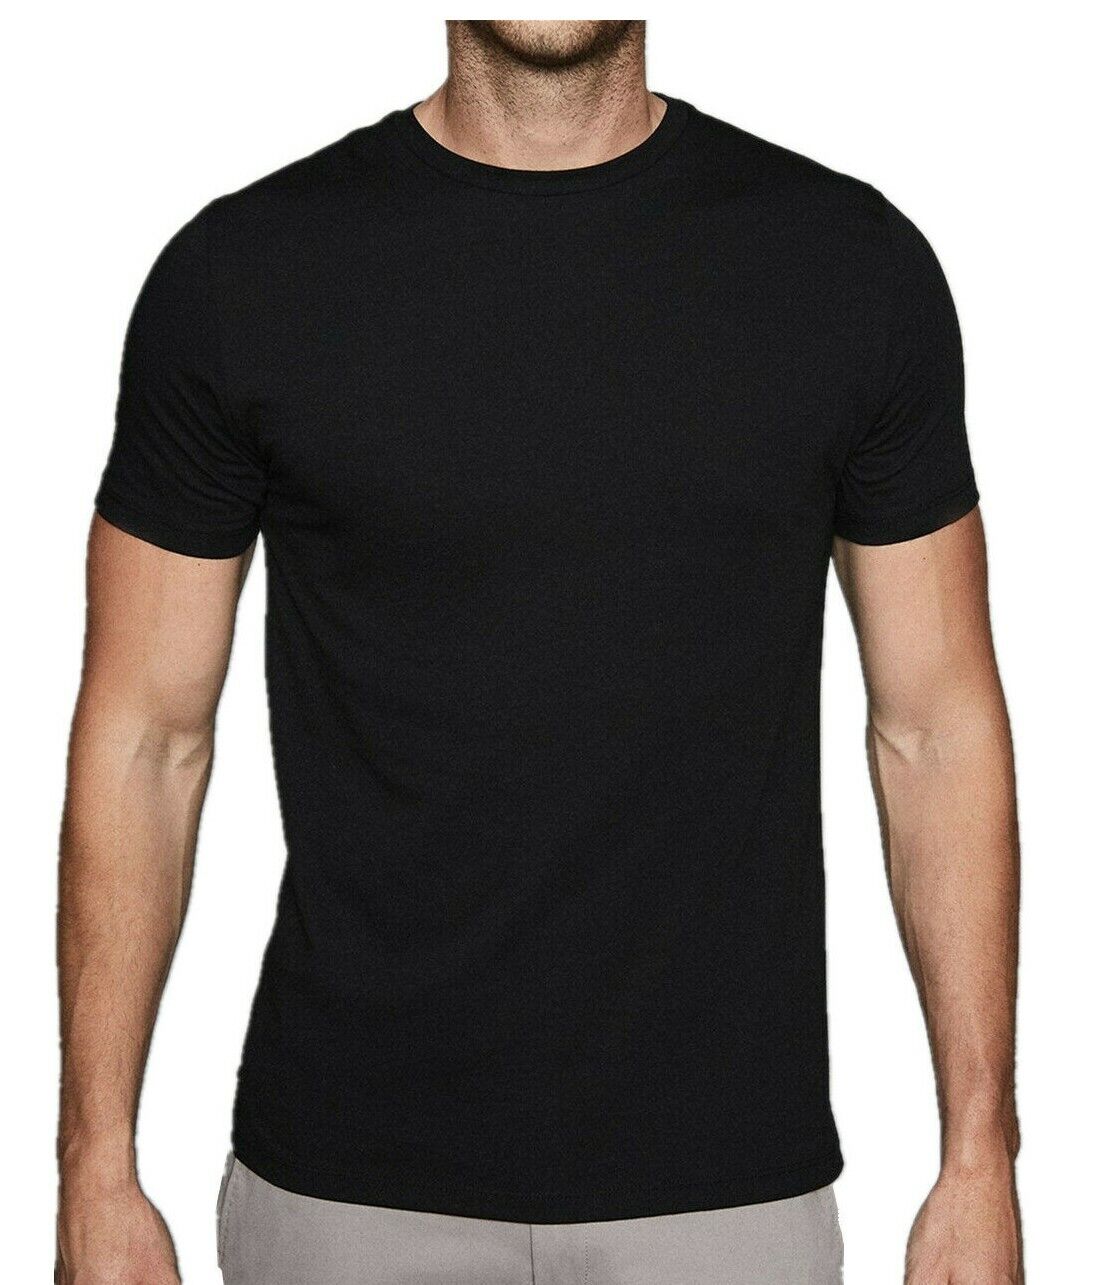 Mens 100% Cotton Thick Casual T-Shirt Black Short Sleeve Tee Crew Neck V-Neck